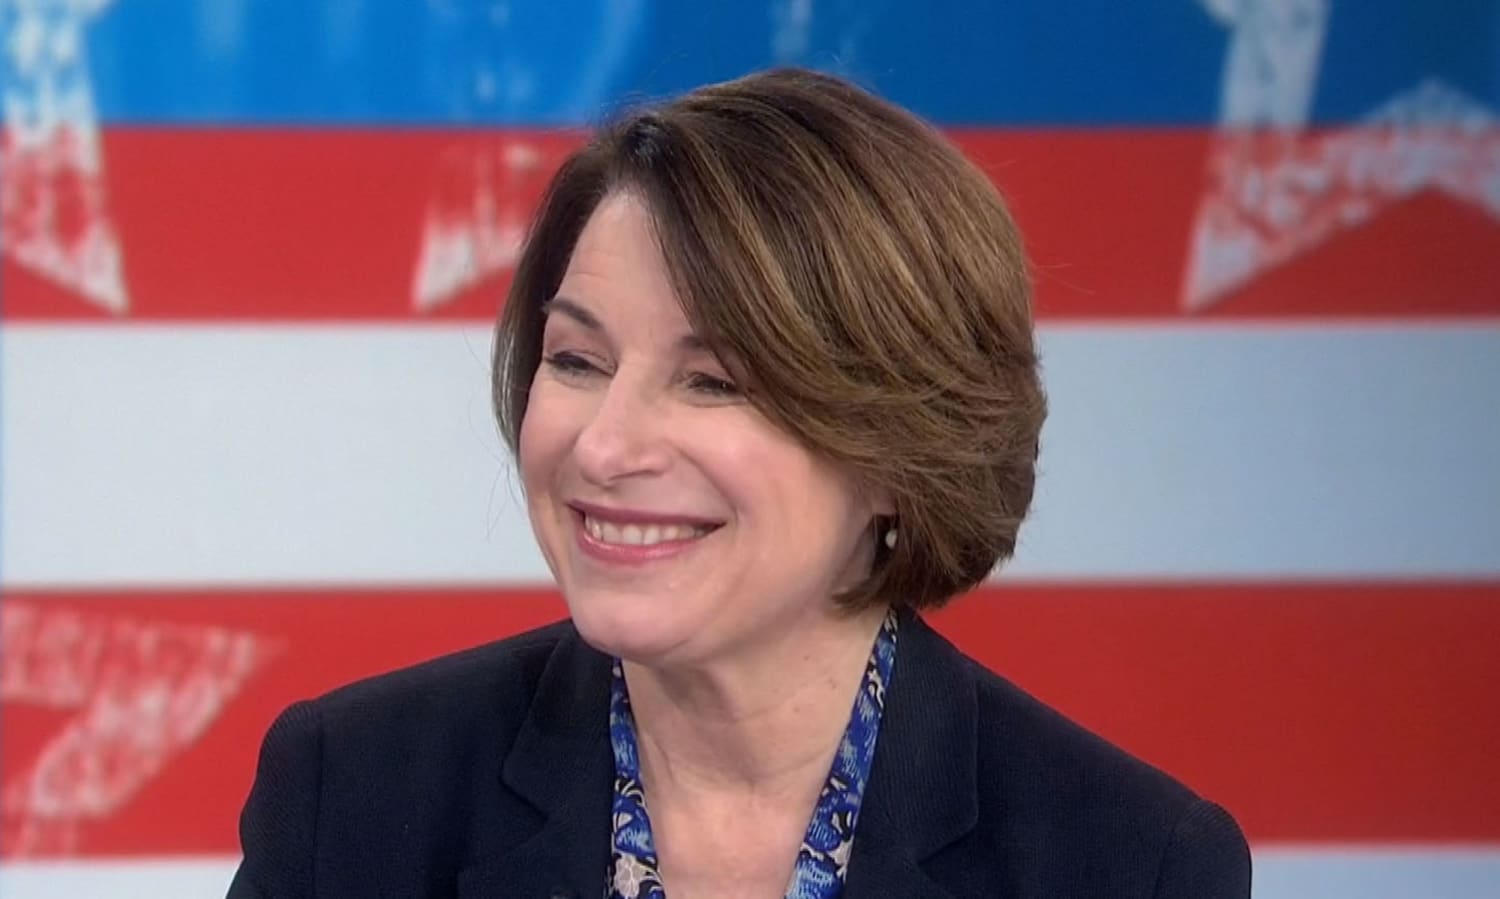 Amy Klobuchar rejects idea that moderate Dems are trying to crush Sanders.